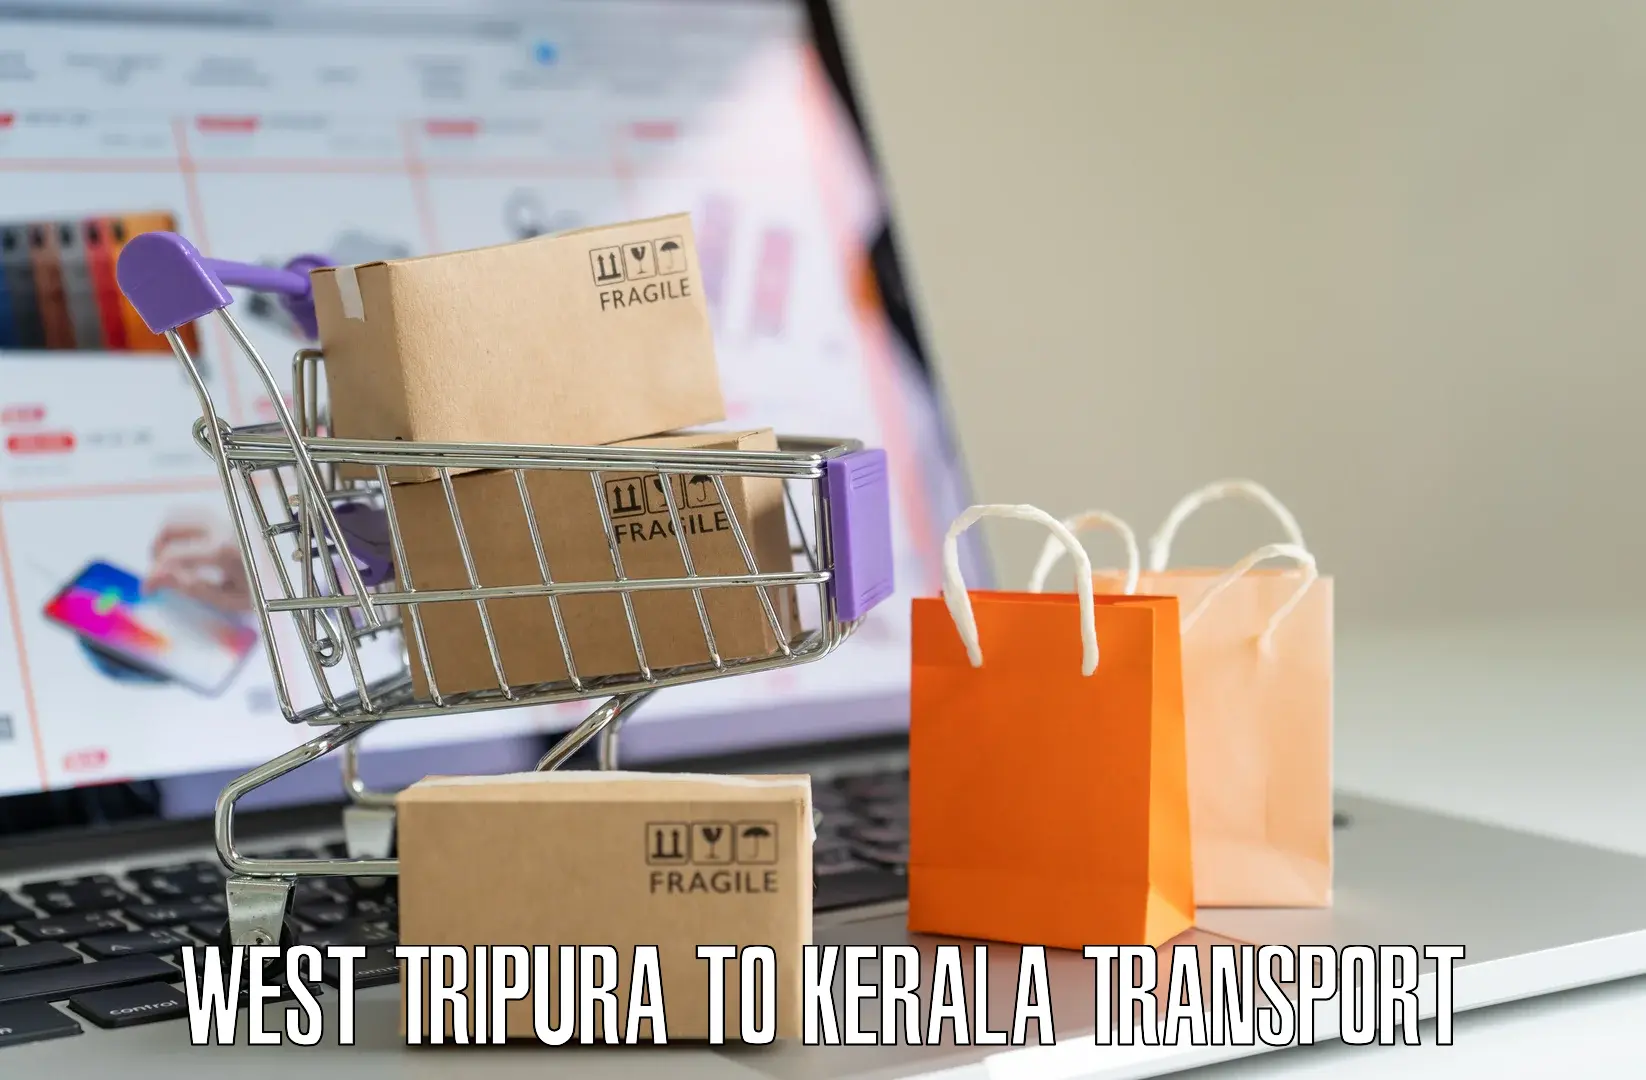 Interstate transport services West Tripura to Palakkad